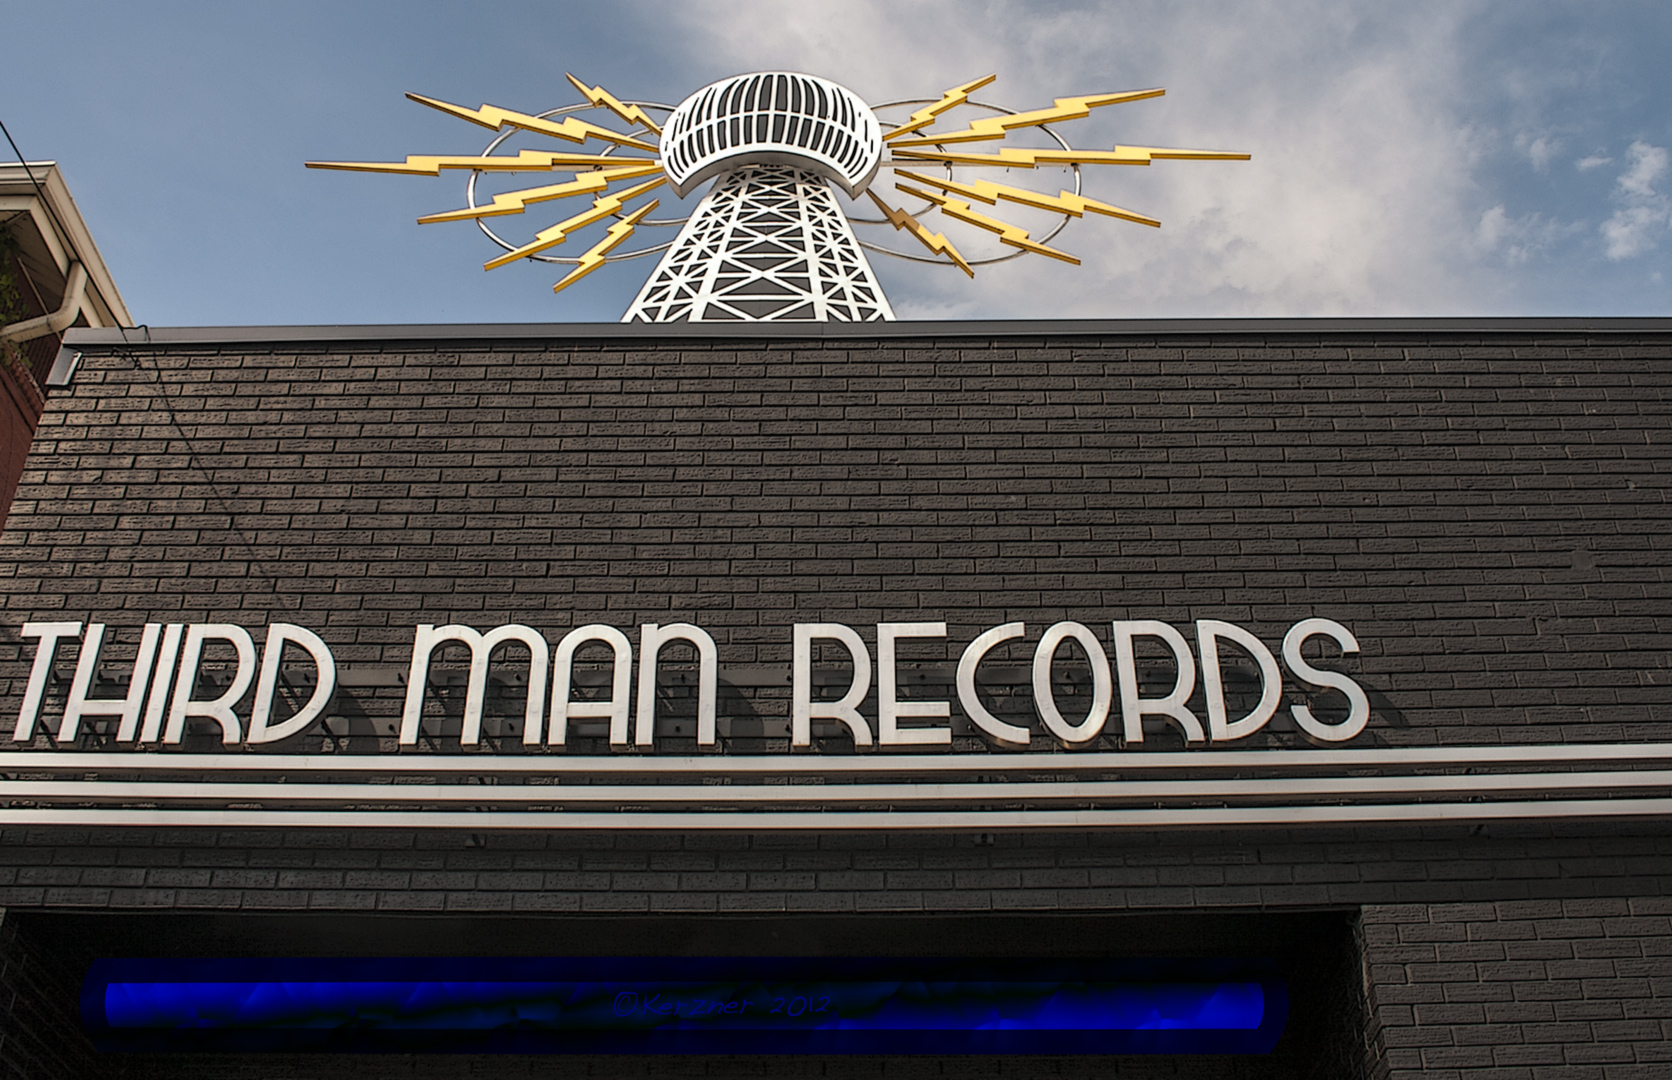 5 things I learned about branding from Third Man Records